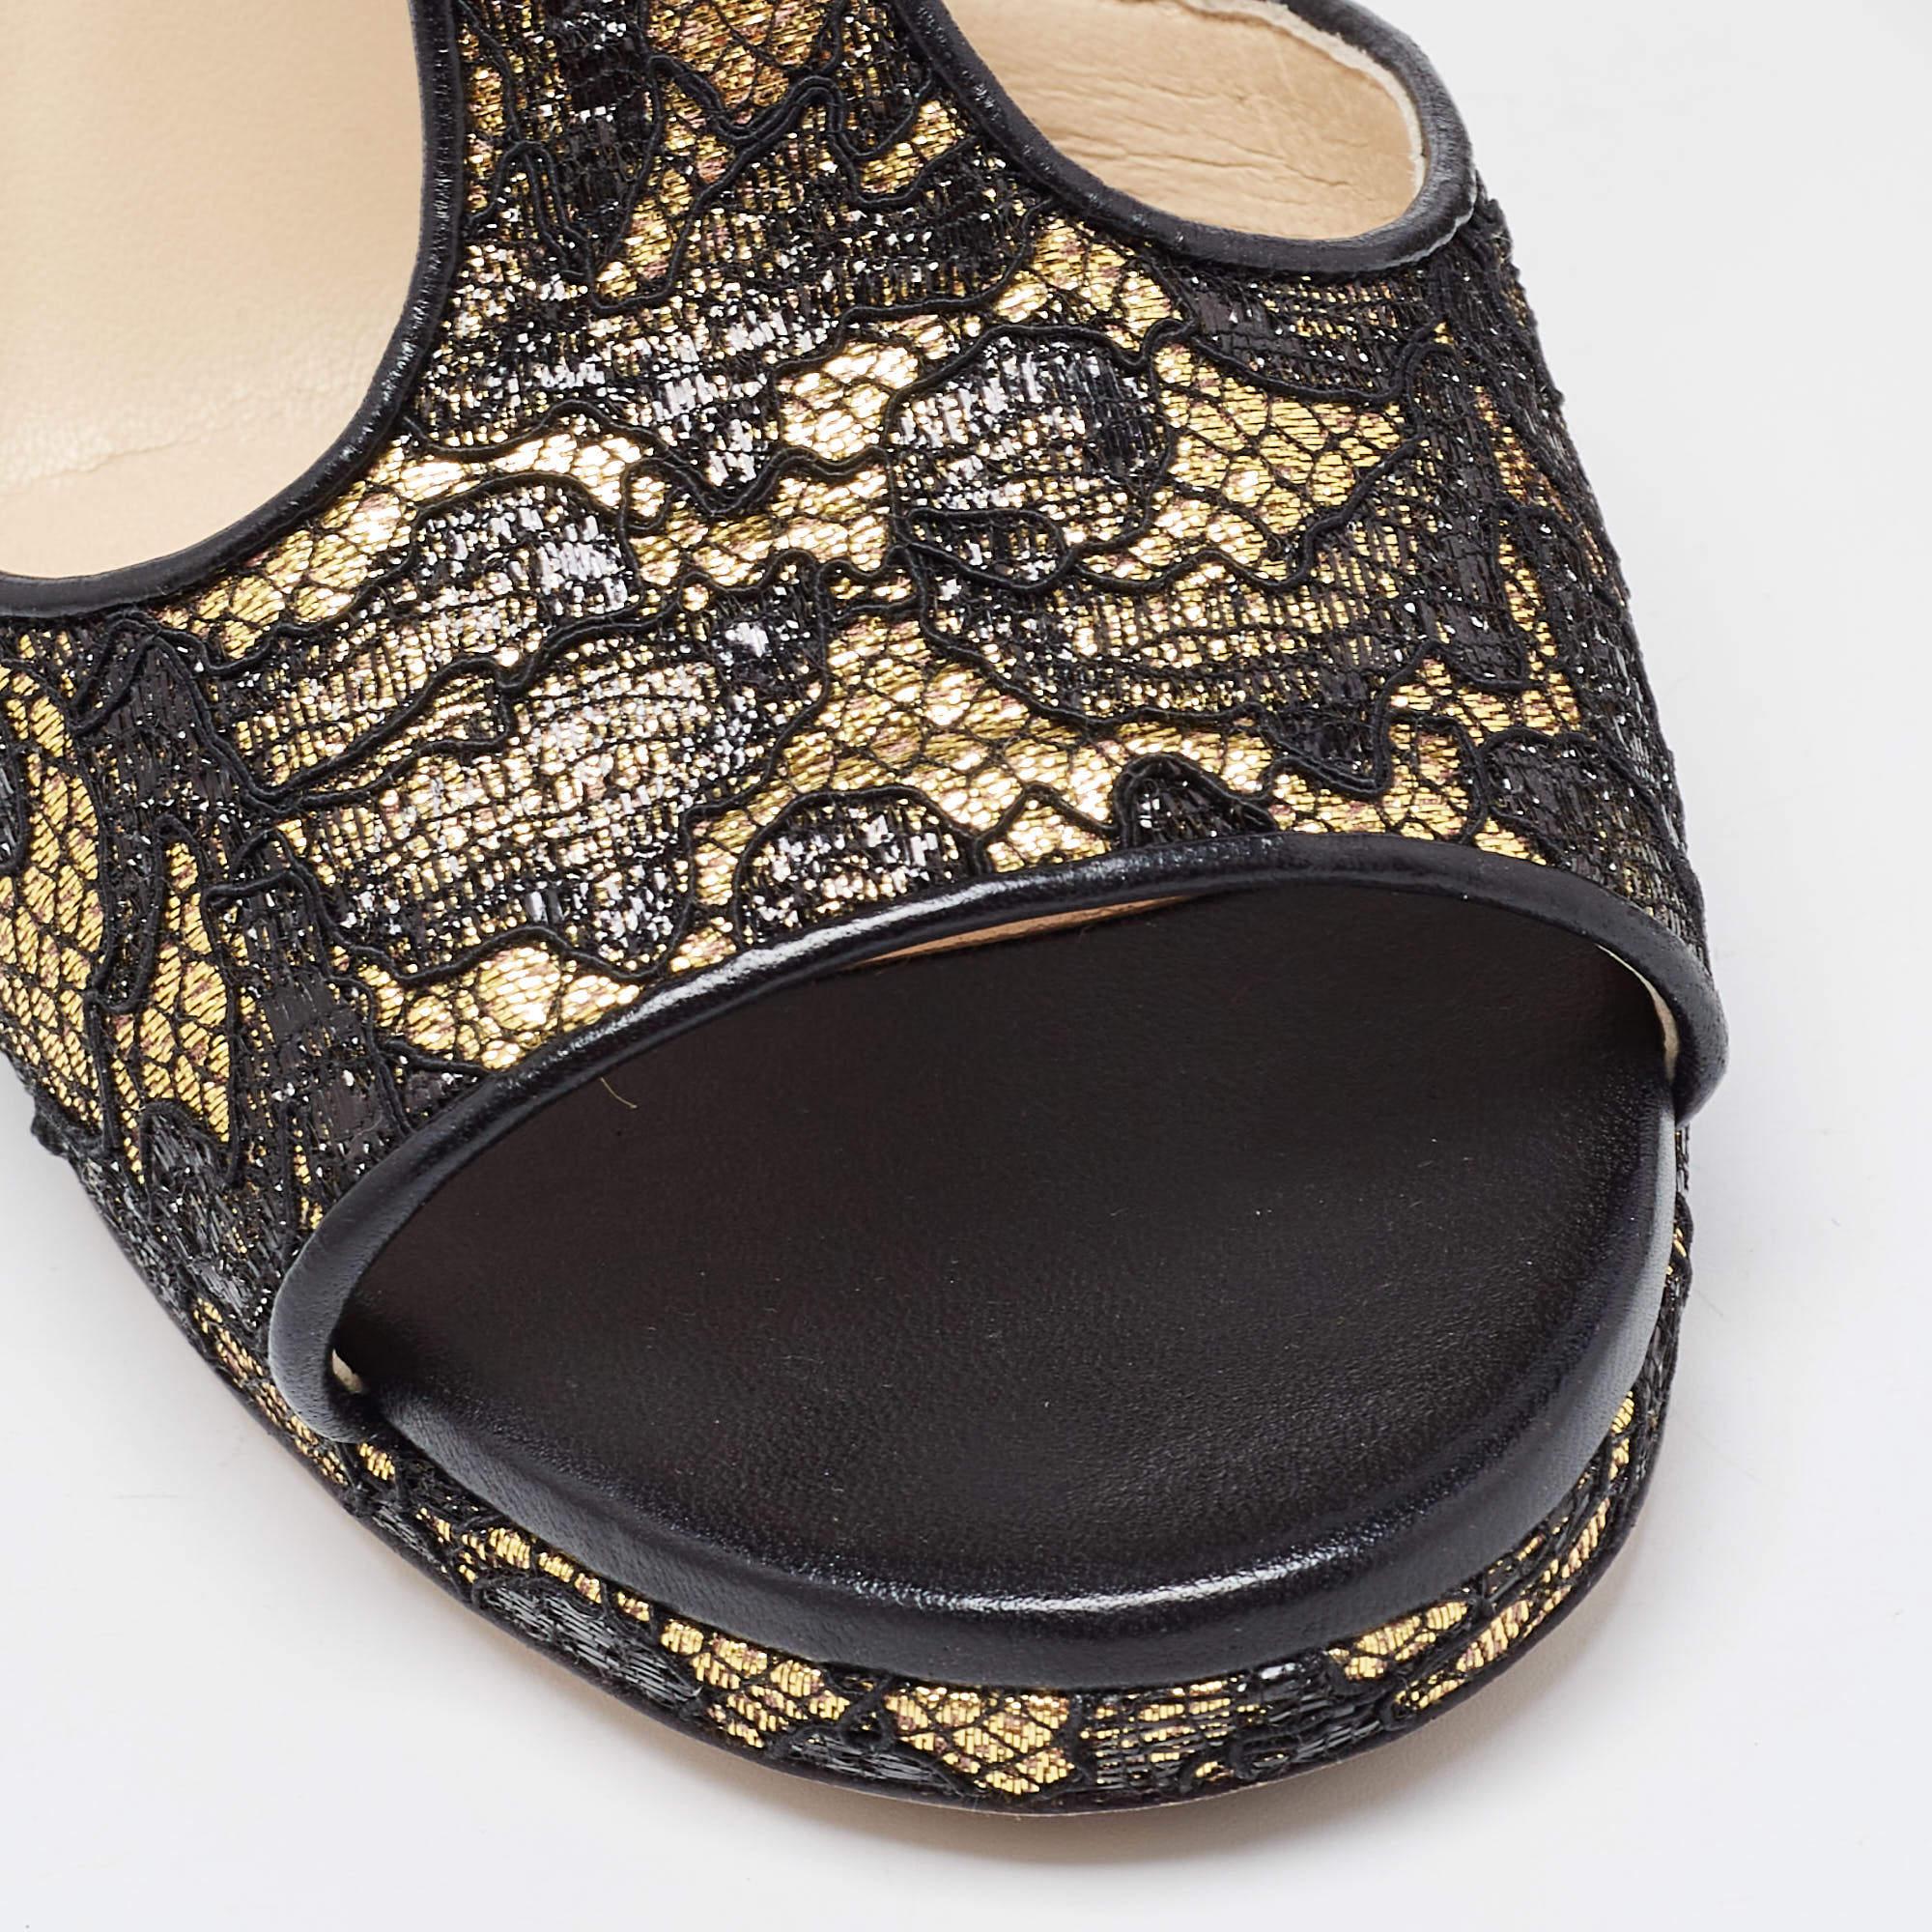 Jimmy Choo Black/Gold Lace and Leather Lana Sandals Size 41 In Good Condition For Sale In Dubai, Al Qouz 2